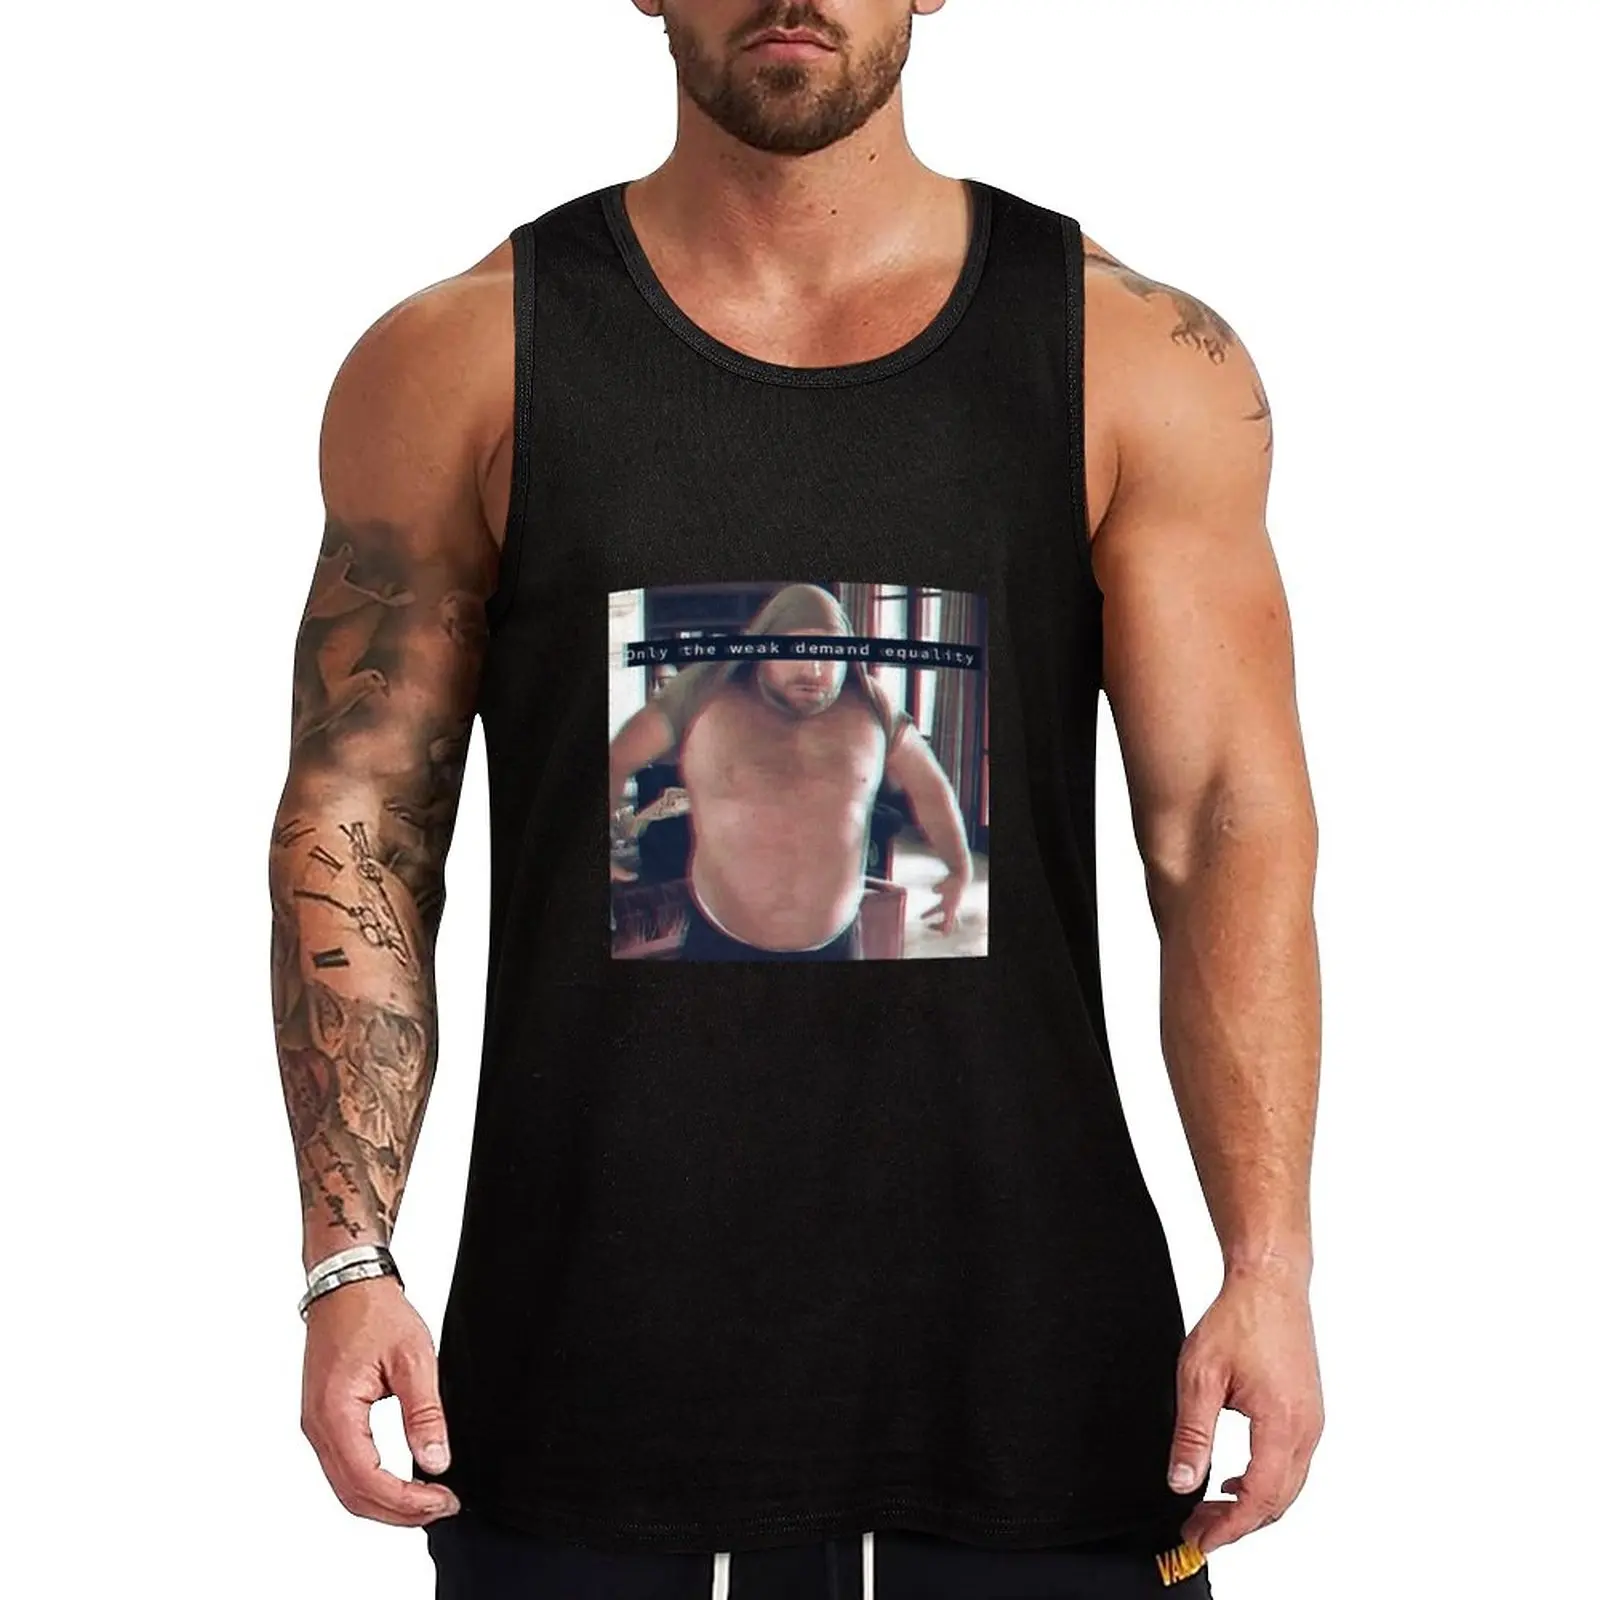 

New AJ only the weak demand equality Tank Top summer 2023 Men's tops Top sleeveless